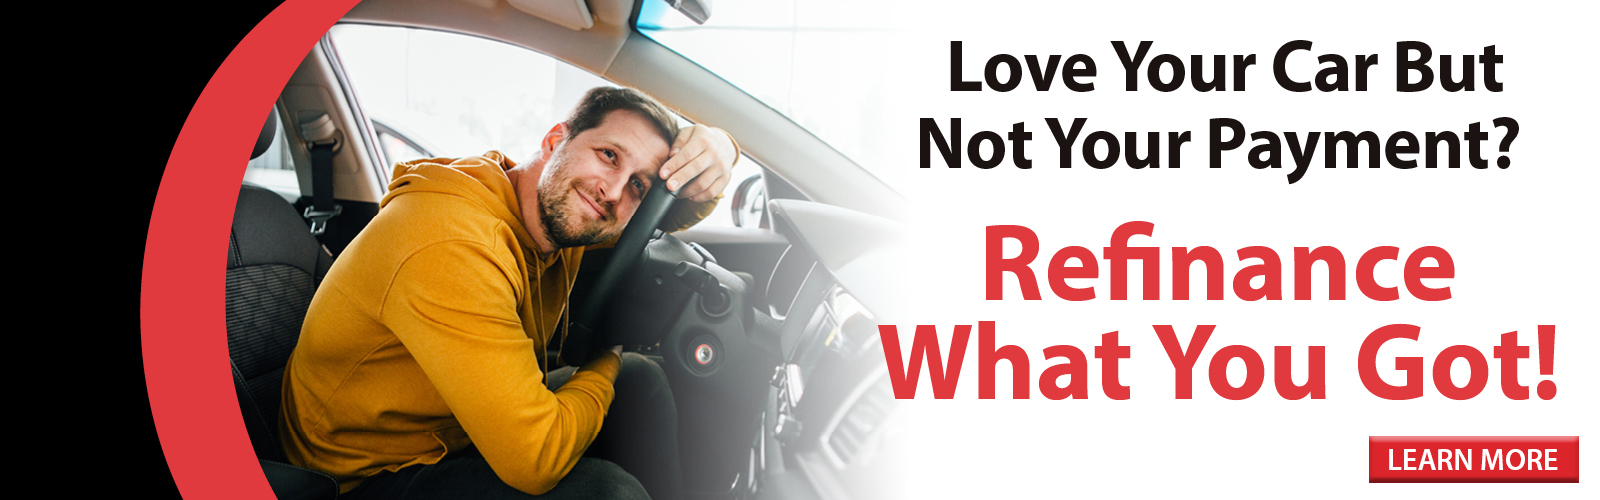 Love your car but not your payment? Refinance what you got!